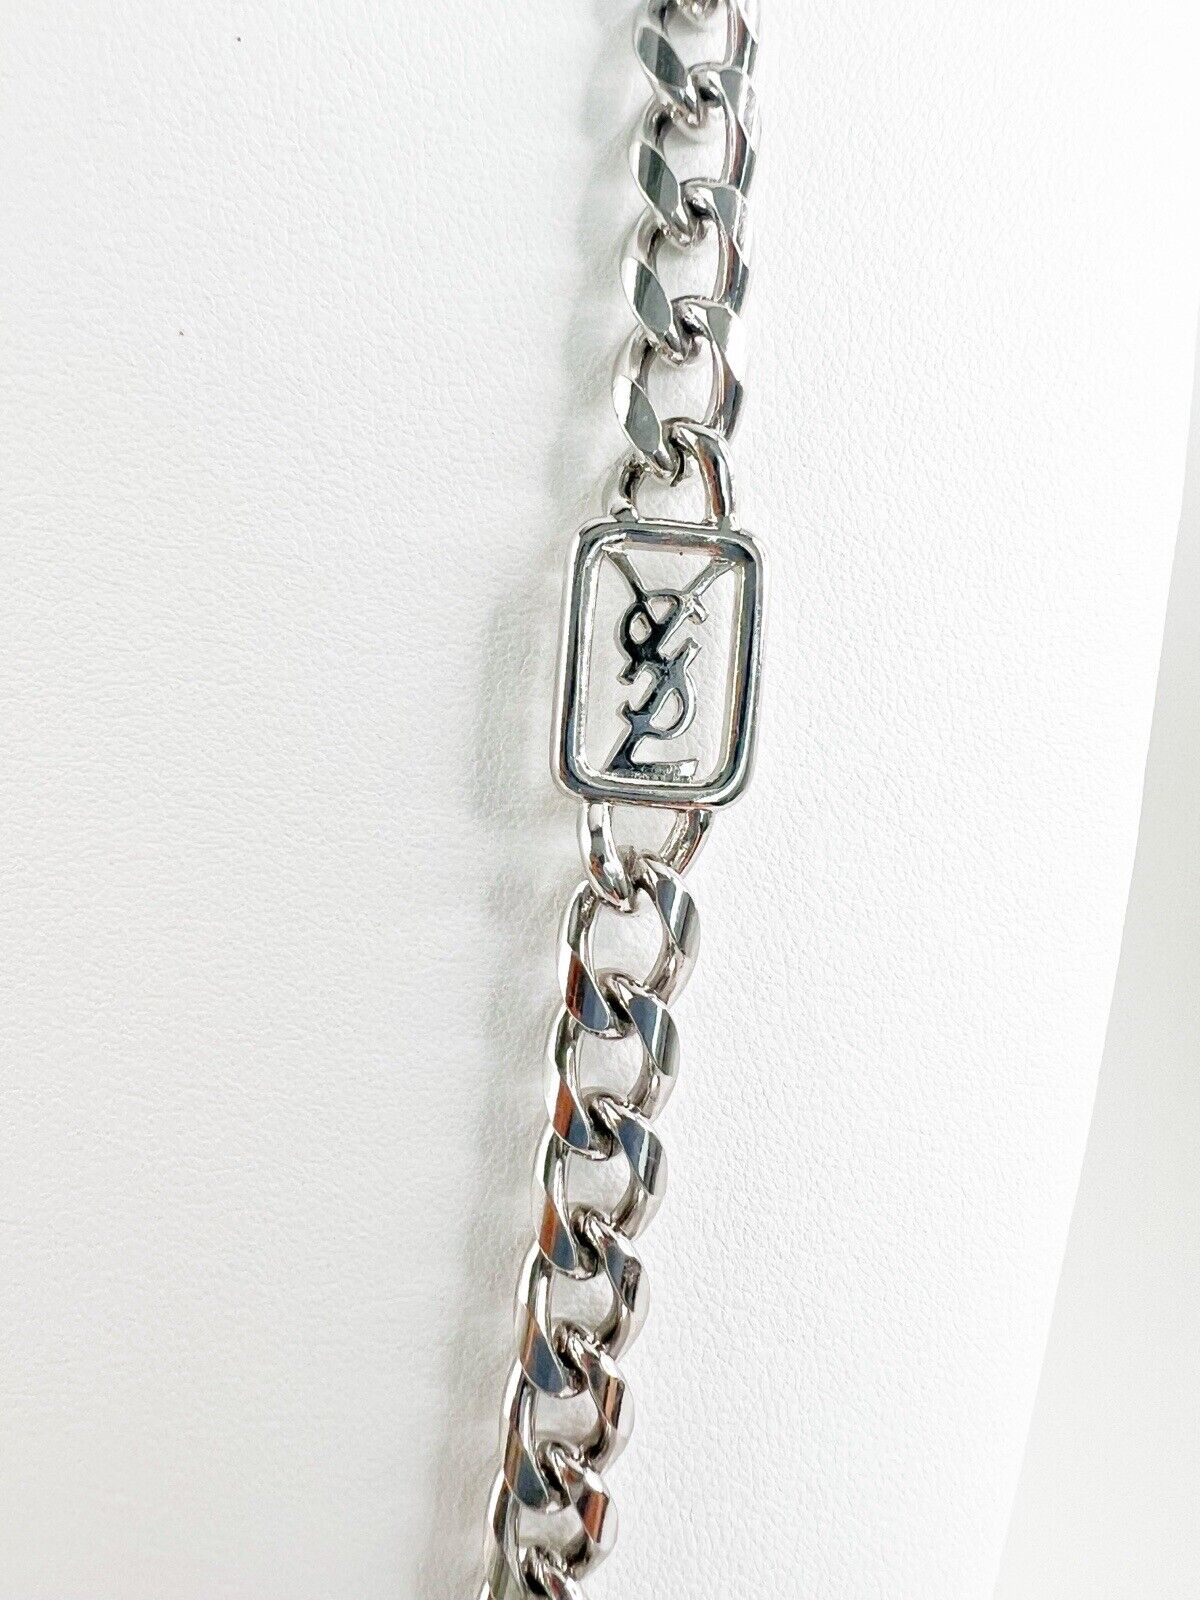 Vintage YSL necklace, chain necklace, charm necklace, vintage necklace, YSL logo necklace, necklace silver, gift for her